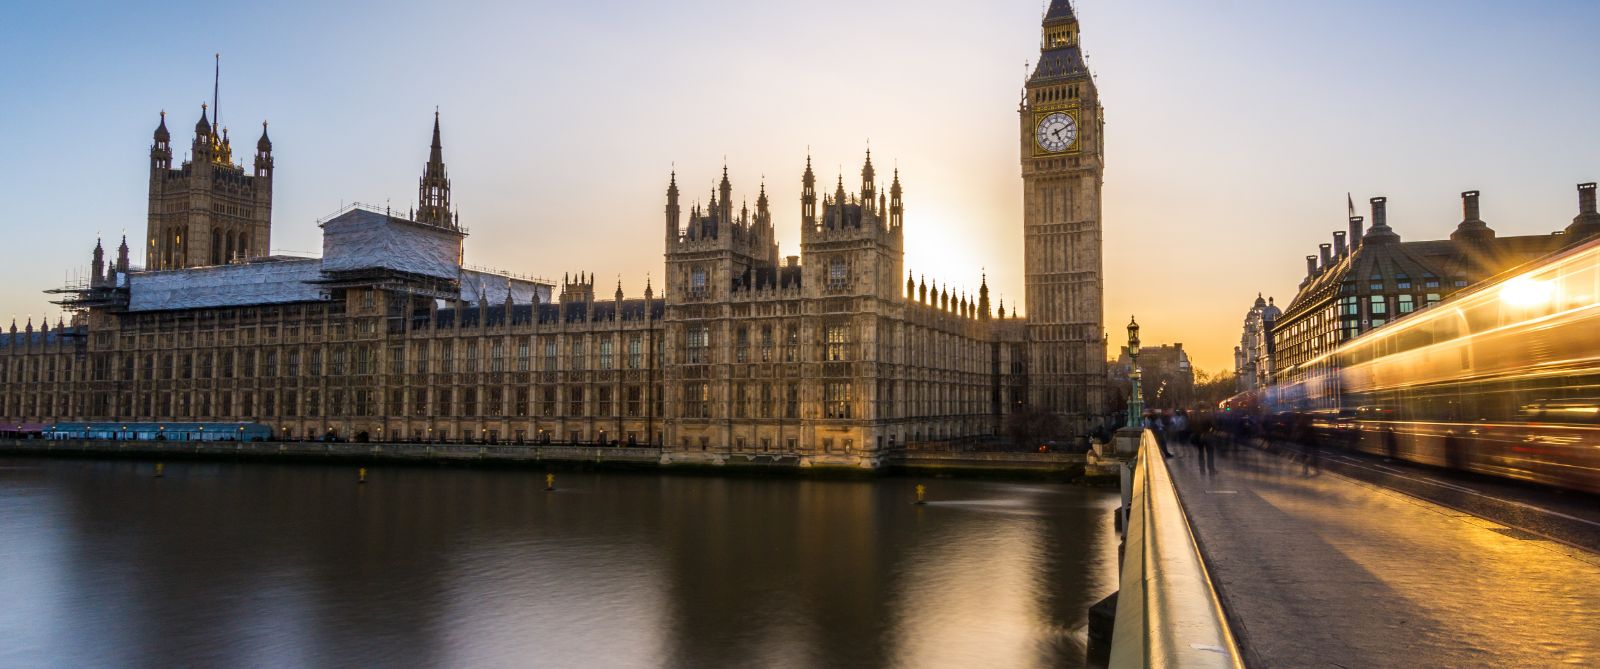 Transactional communications for Big Ben and the houses of parliament in London.